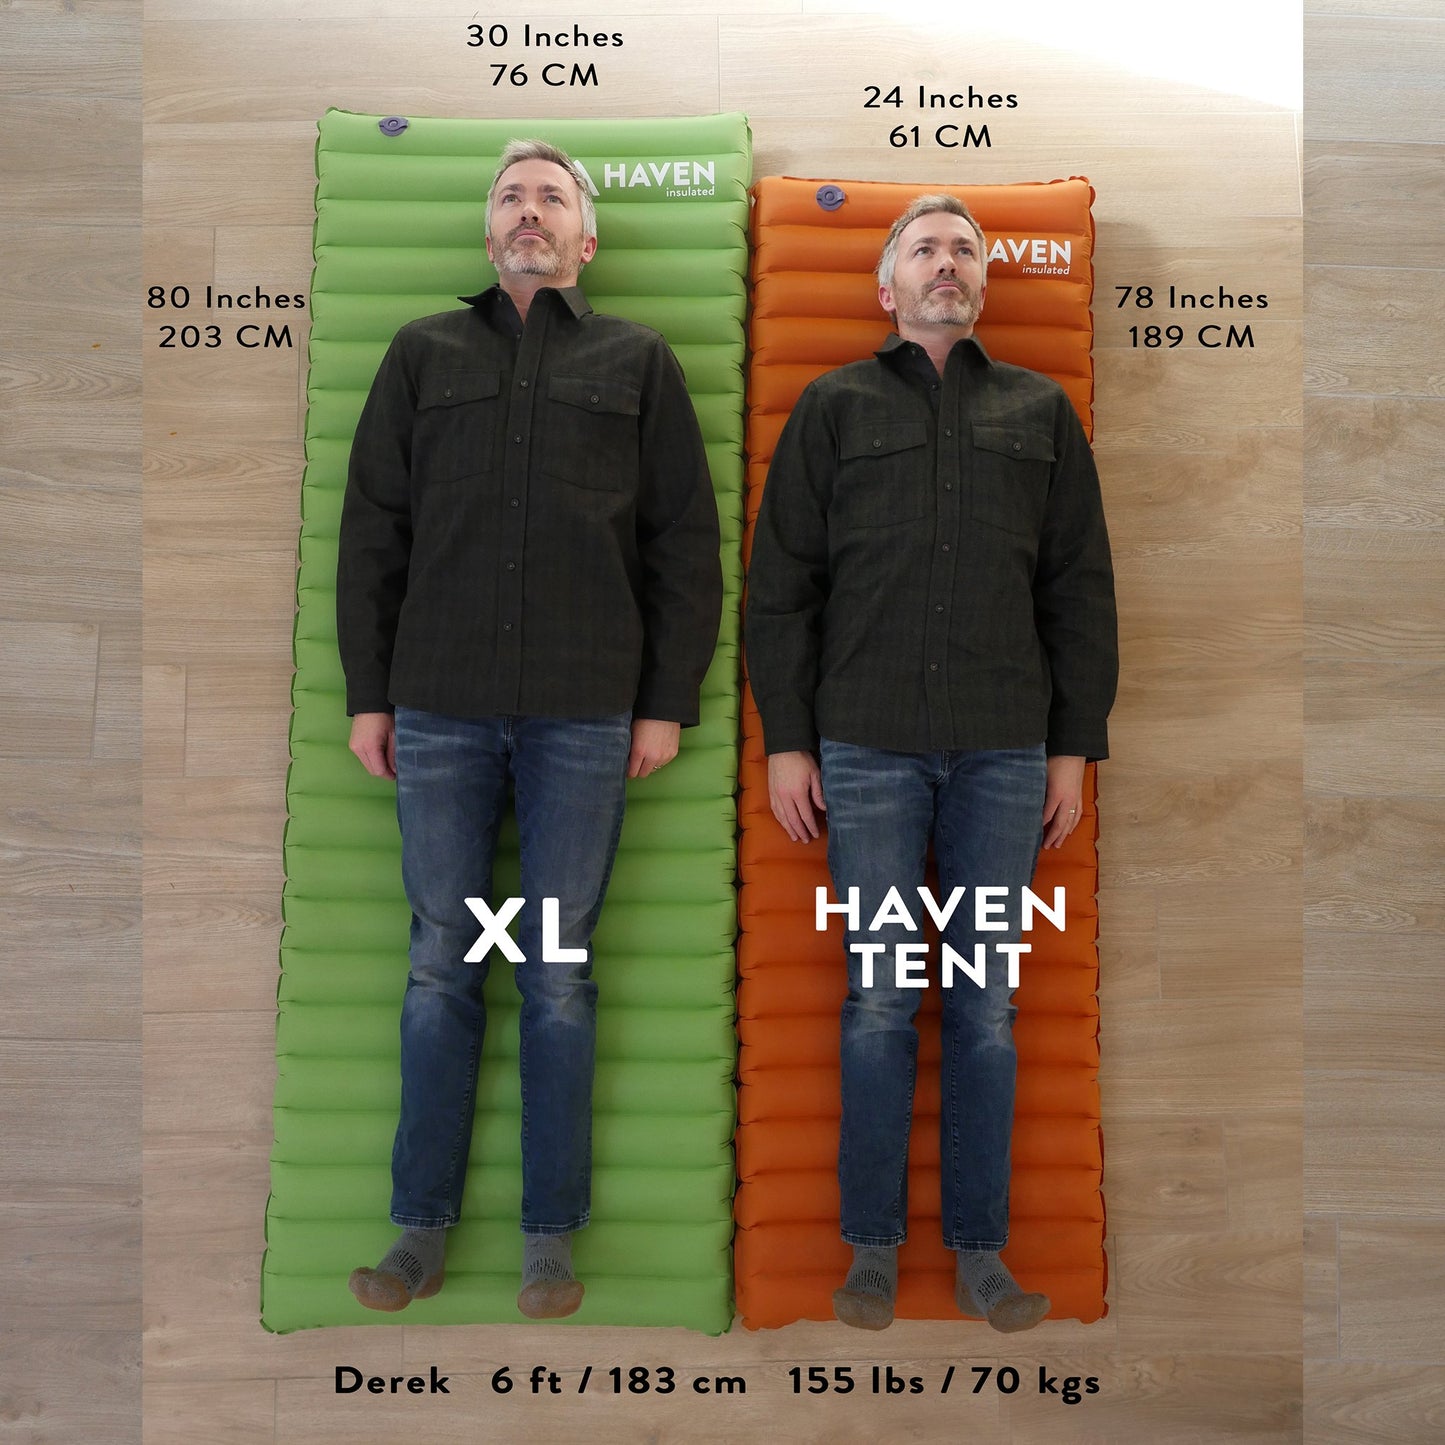 Showing the size difference between an XL sleeping pad and a regular sleeping pad